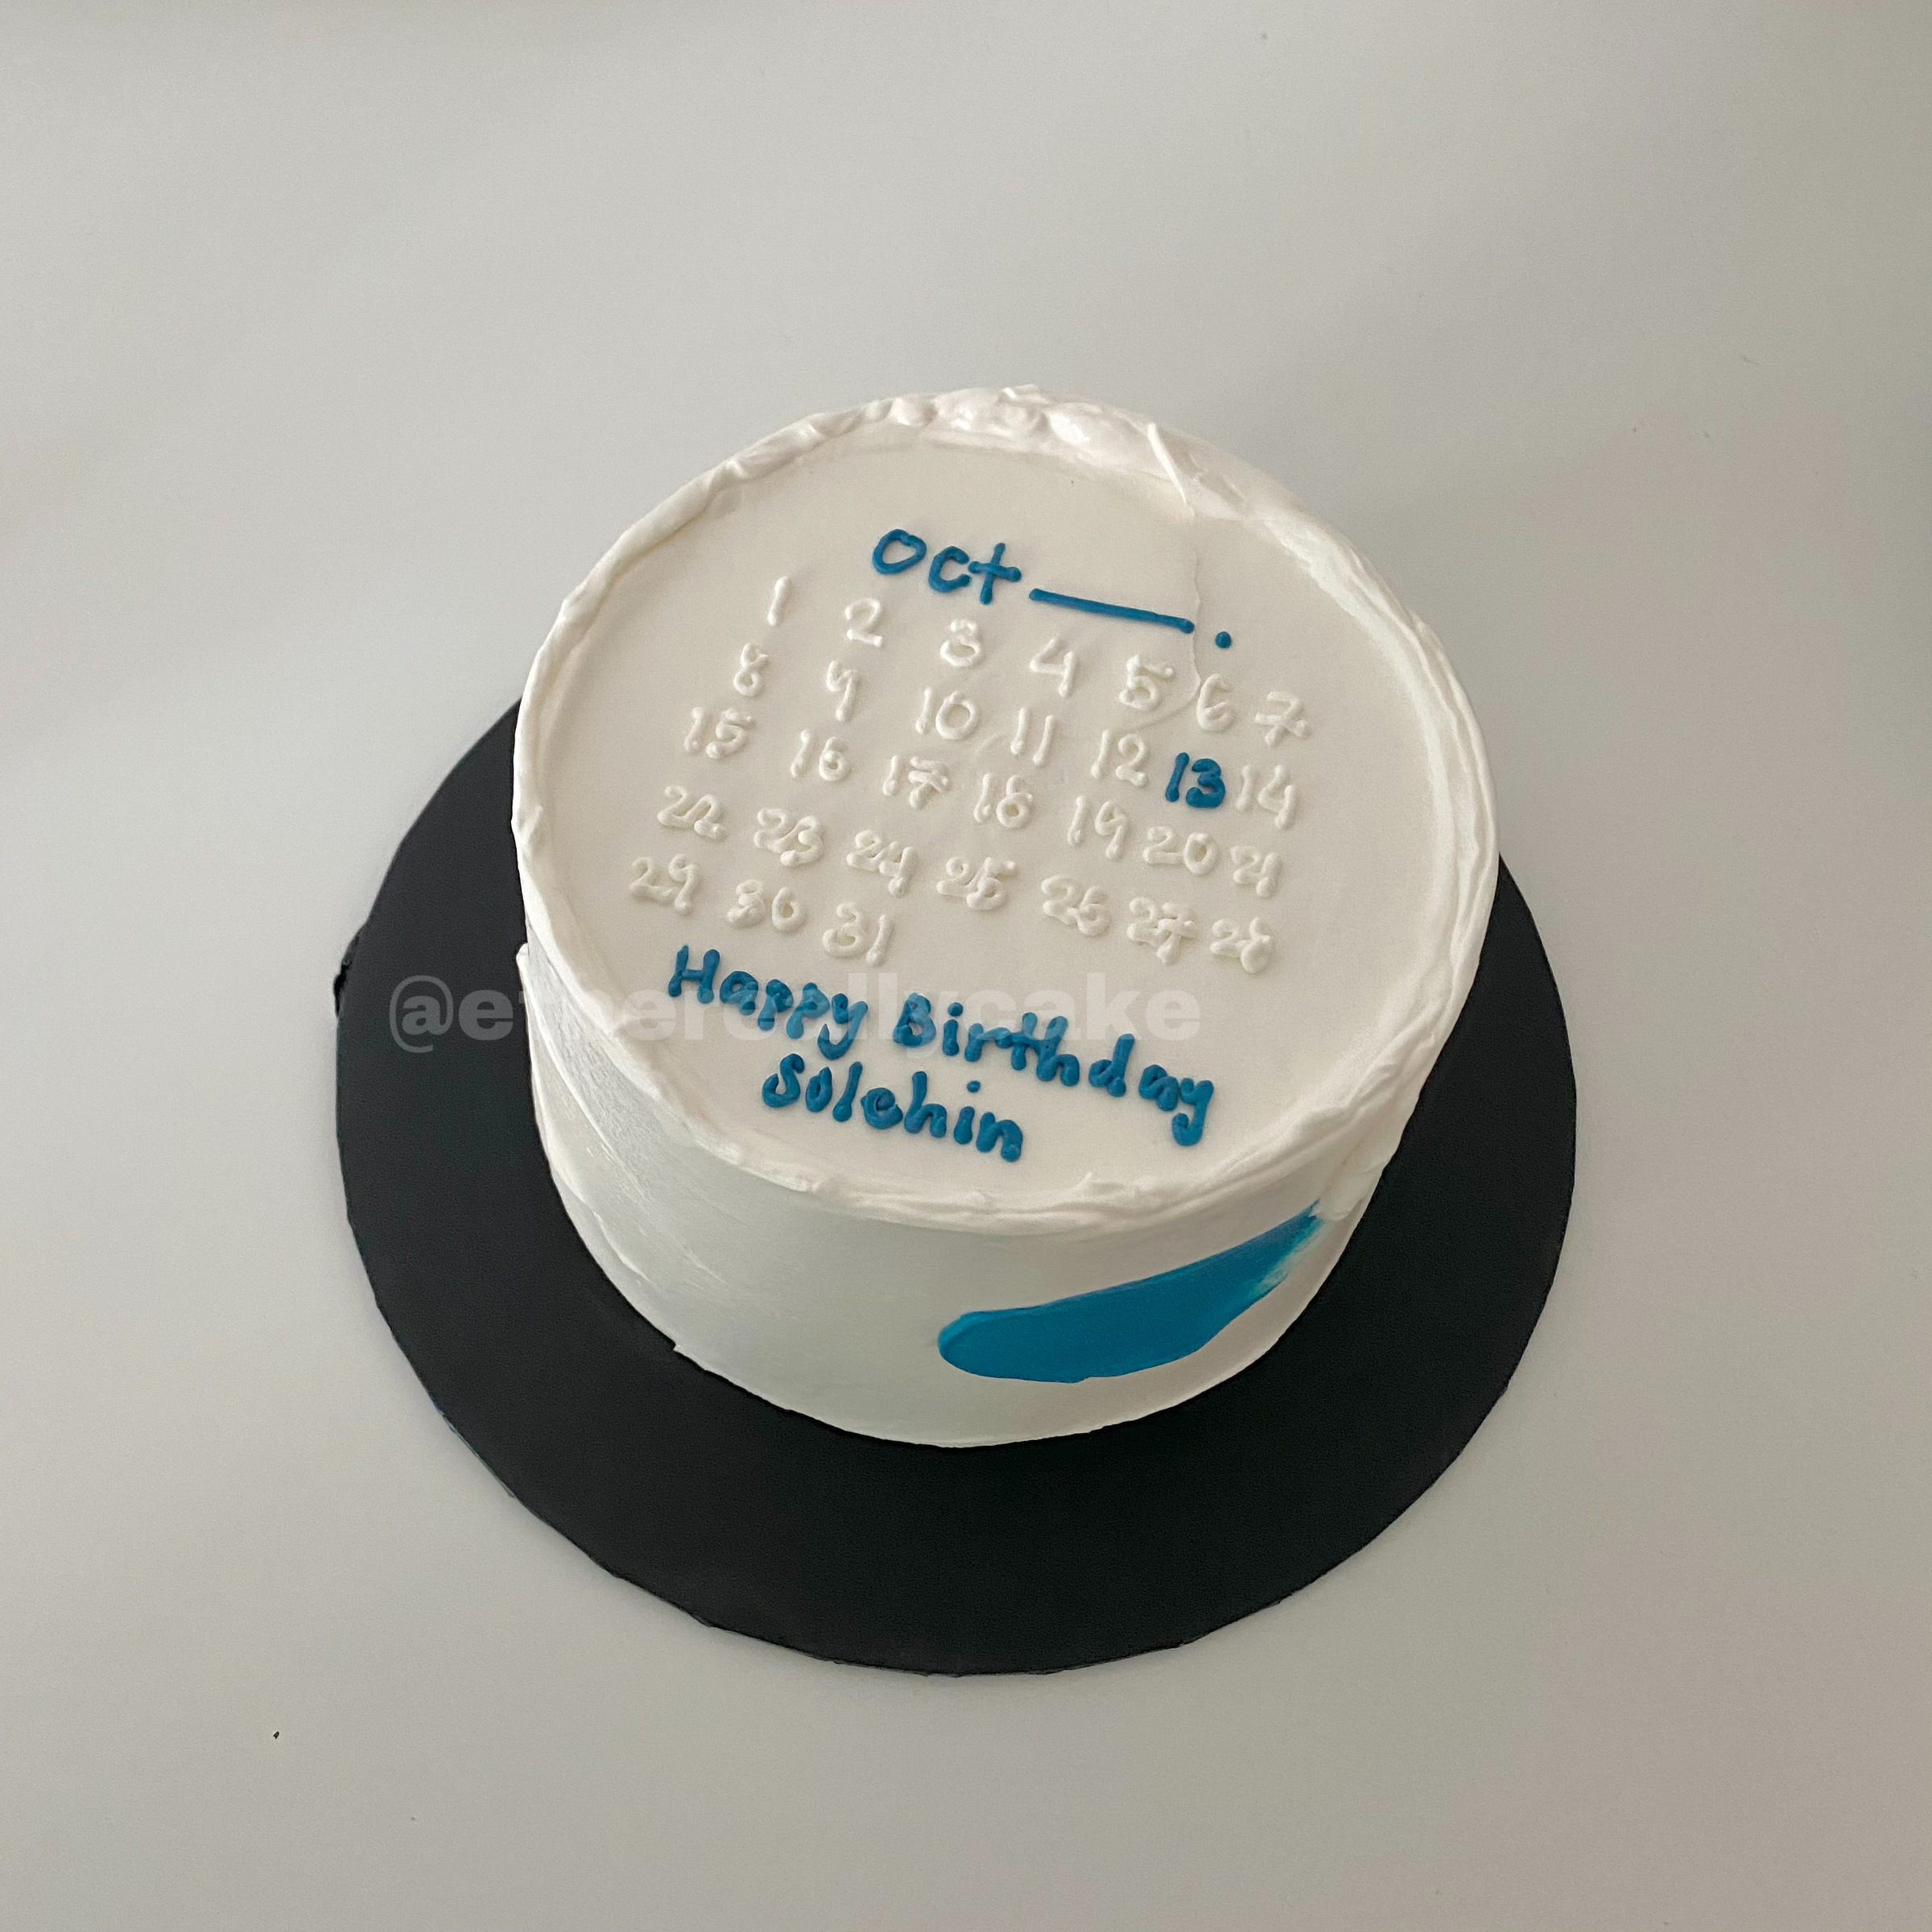 THM038 - For Software Person | Valentine Day | Cake Delivery in Bhubaneswar  – Order Online Birthday Cakes | Cakes on Hand